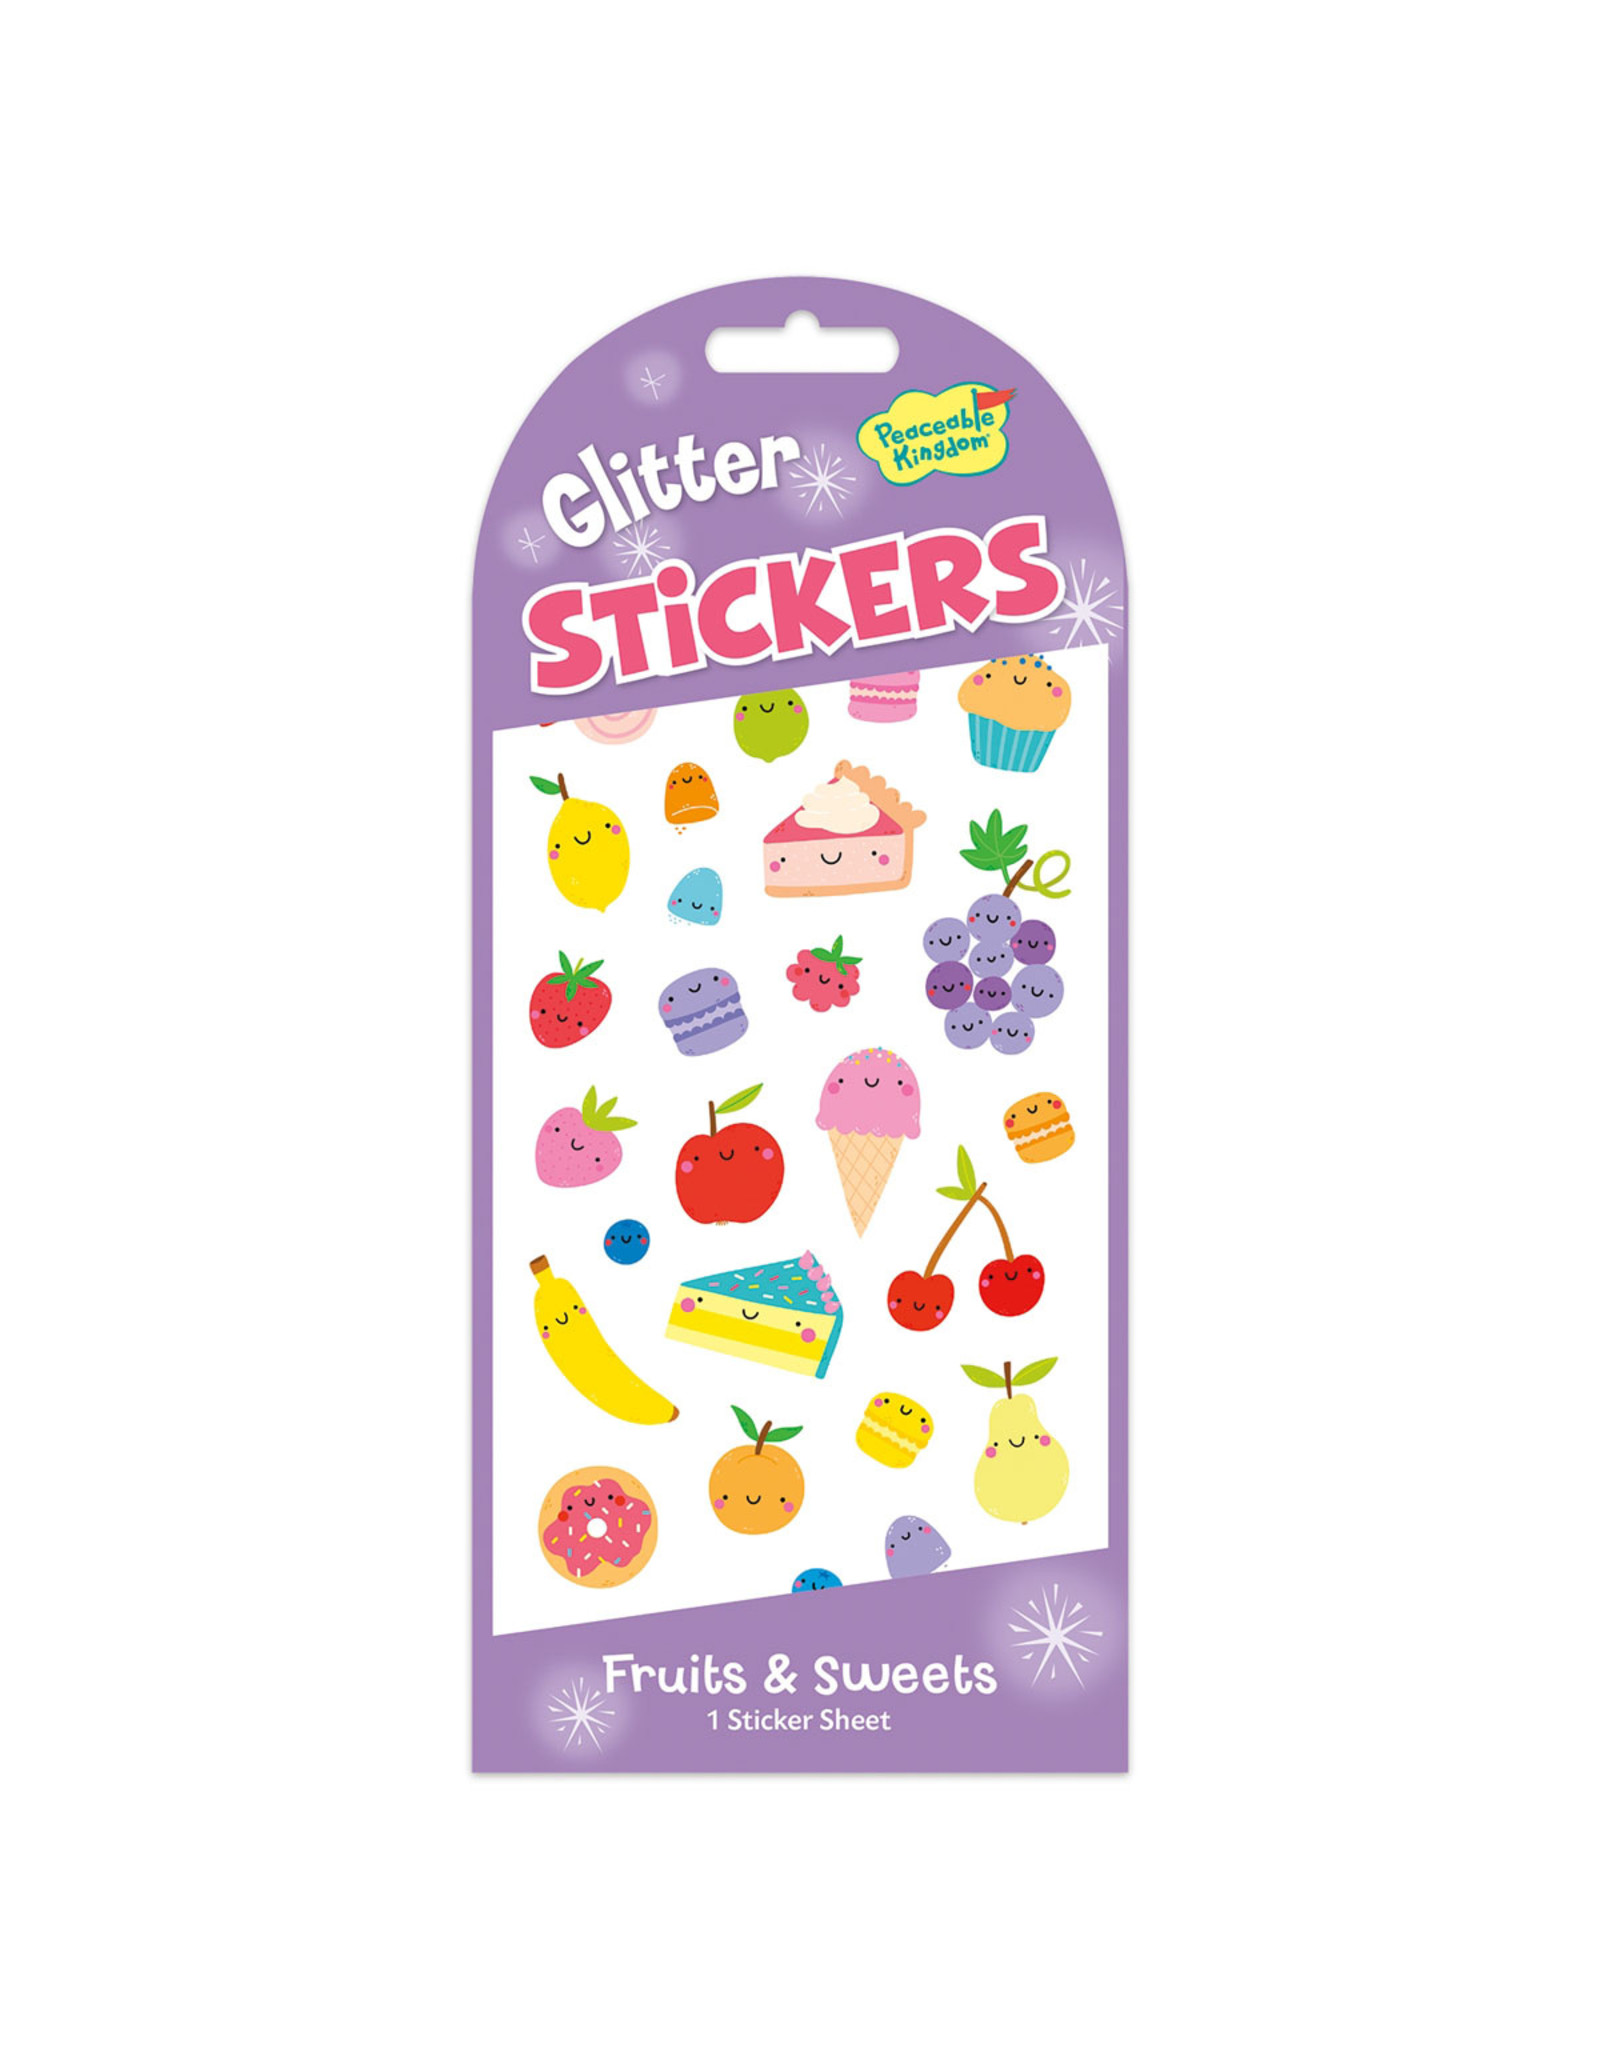 Peaceable Kingdom Fruits & Sweets Glitter Stickers